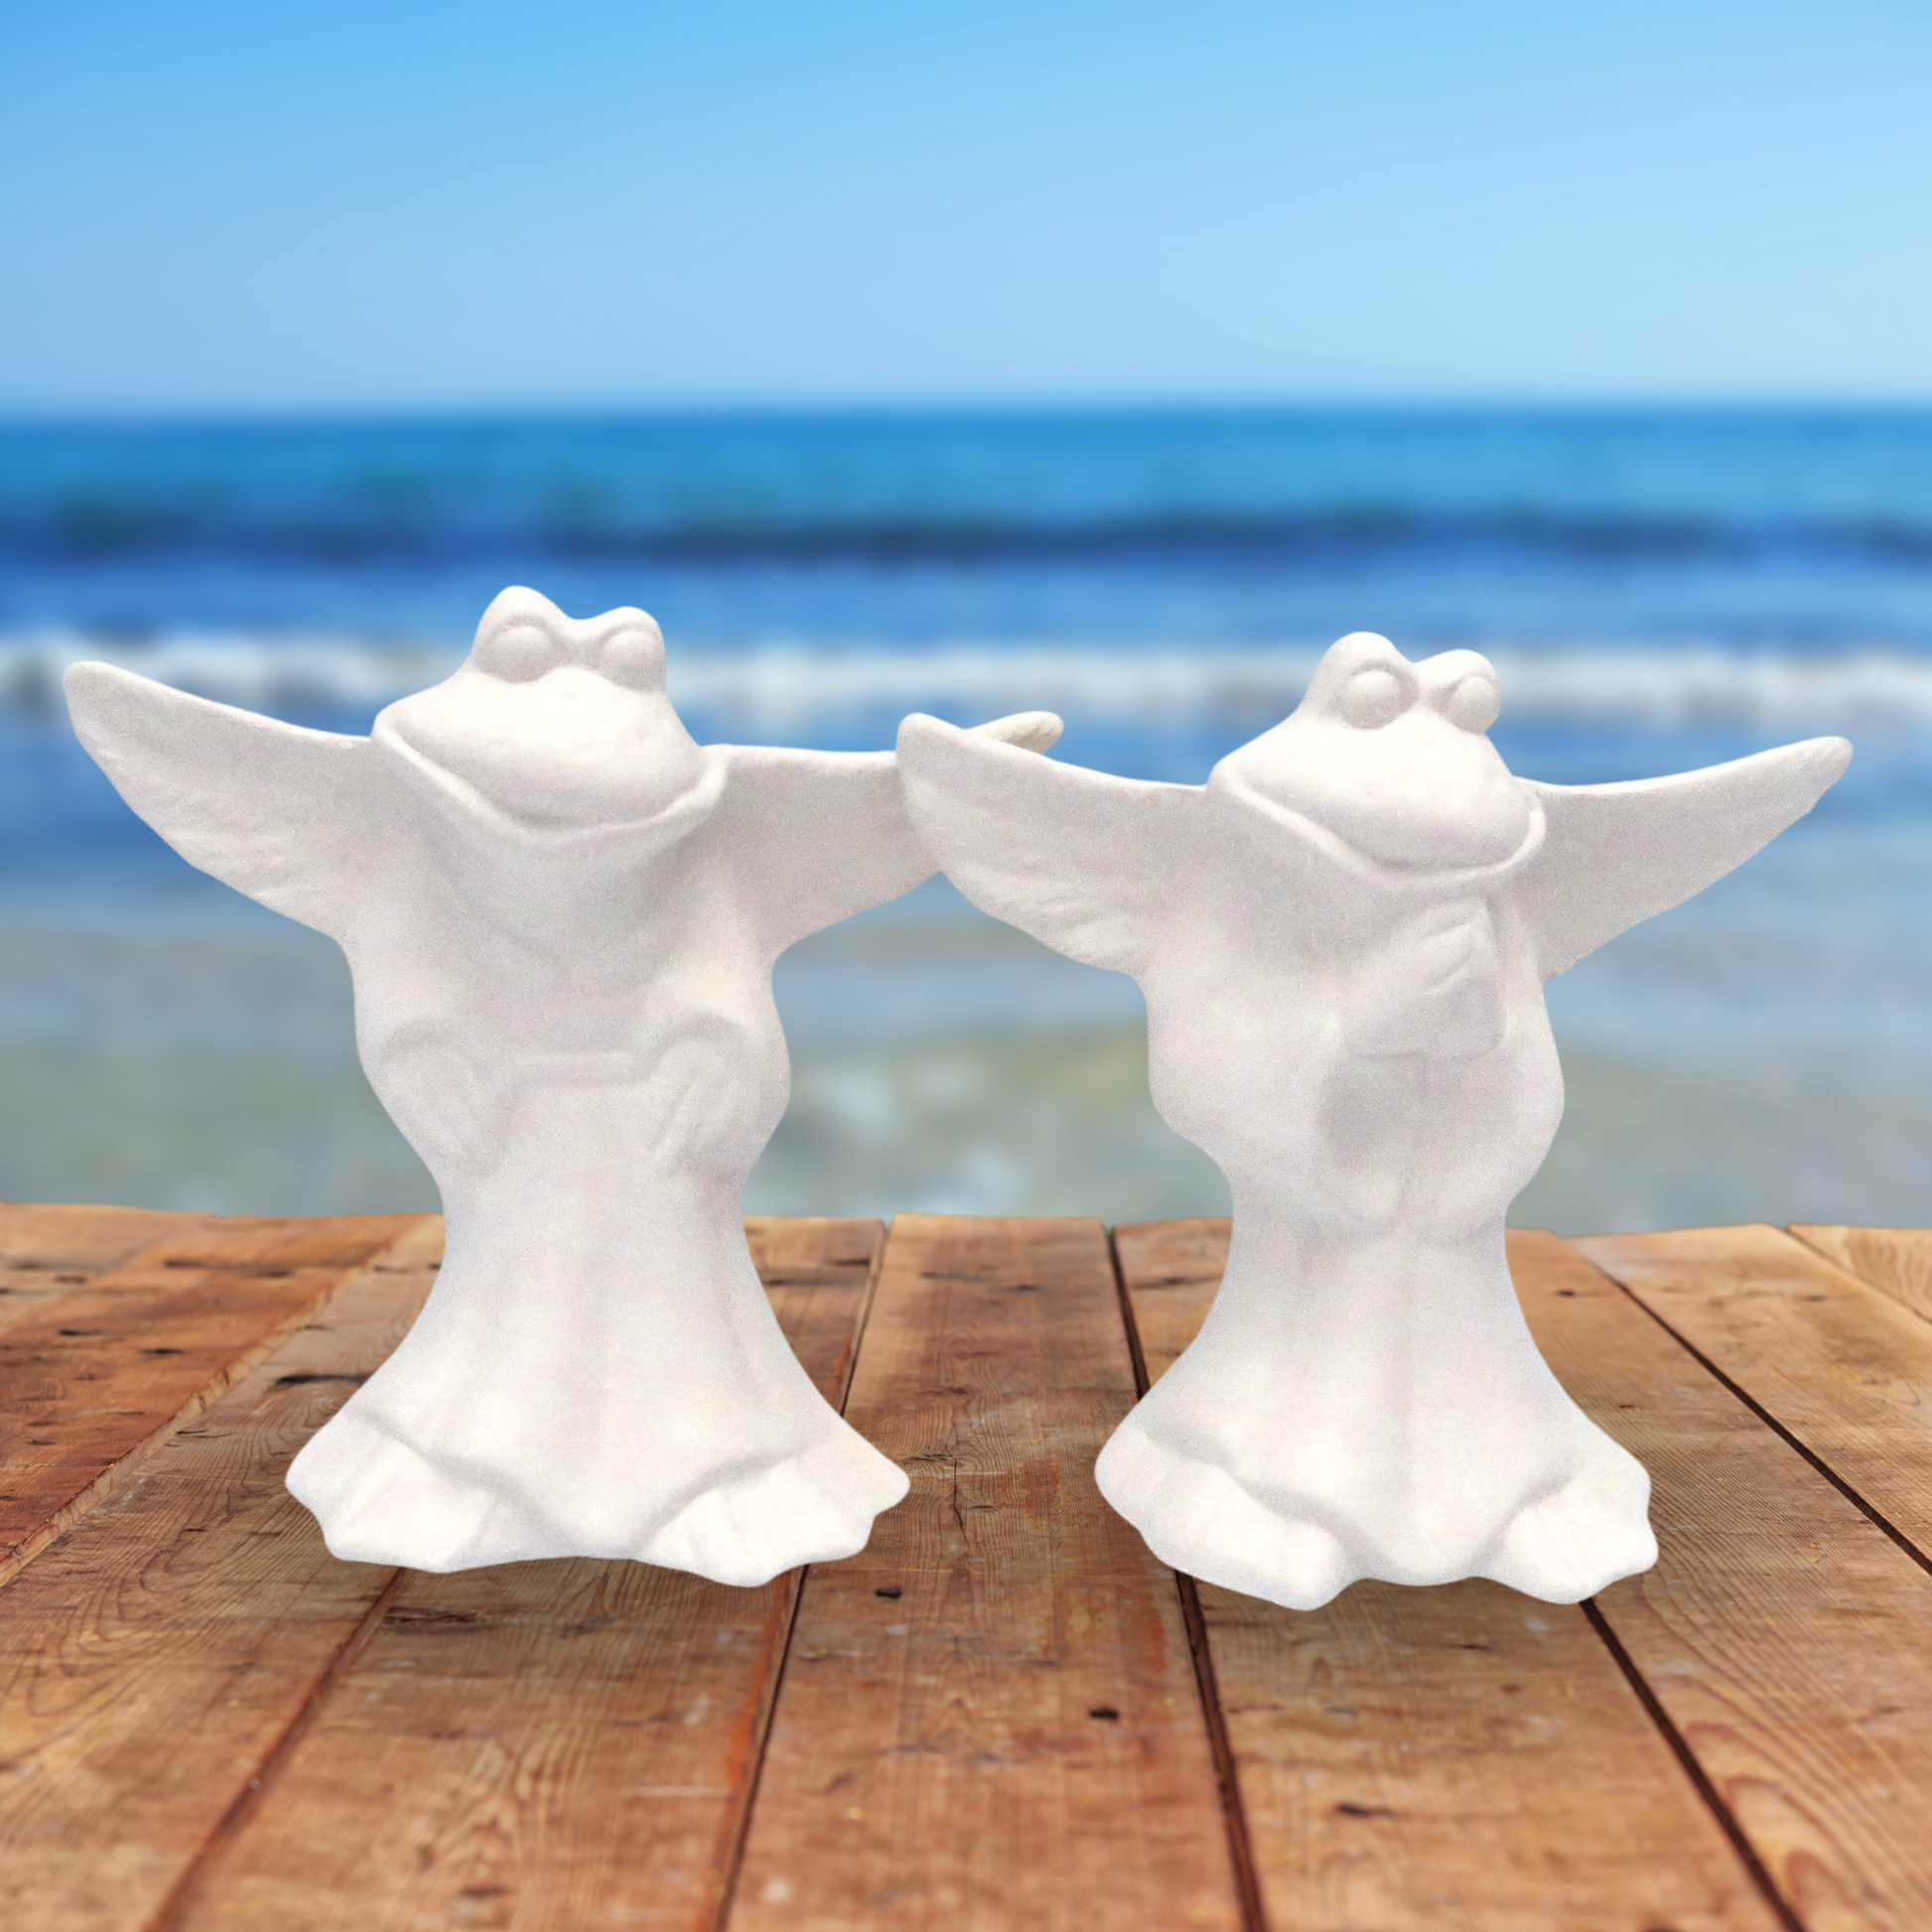 2 unpainted ceramic frog angels standing on a wood table with the ocean in the background.  One has its hands to the side.  The other has its hands in the prayer position.  The wings are outstretched.